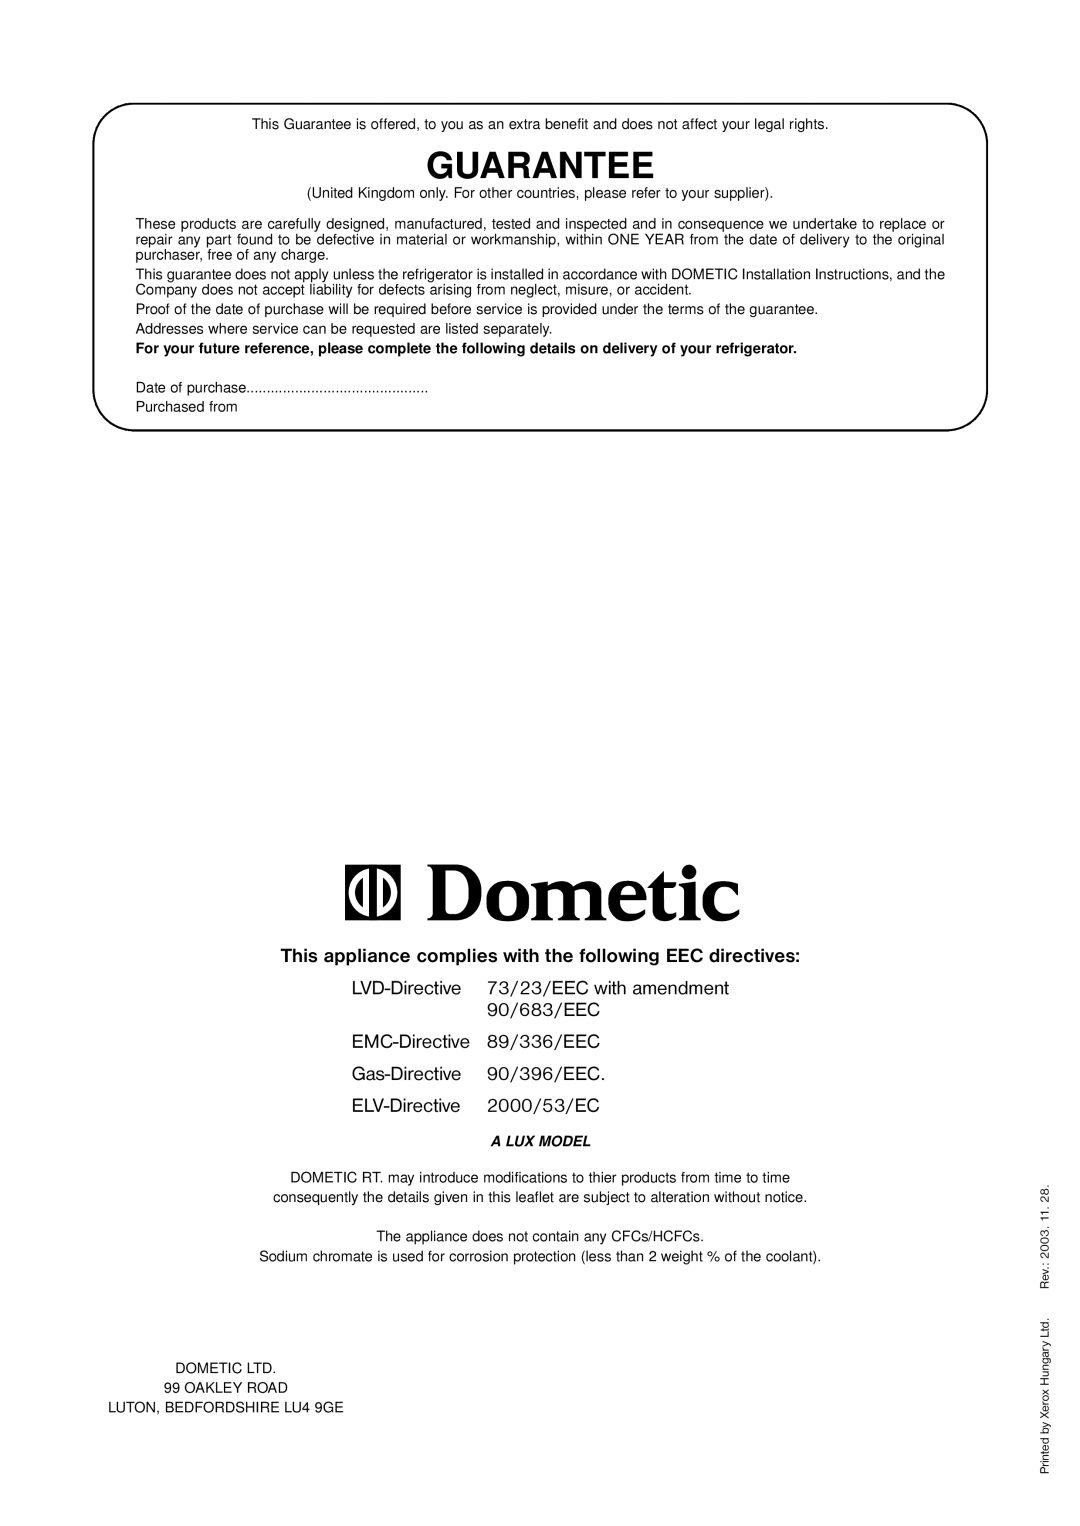 Dometic RM 123E, RM 122F This appliance complies with the following EEC directives, LVD-Directive 73/23/EEC with amendment 